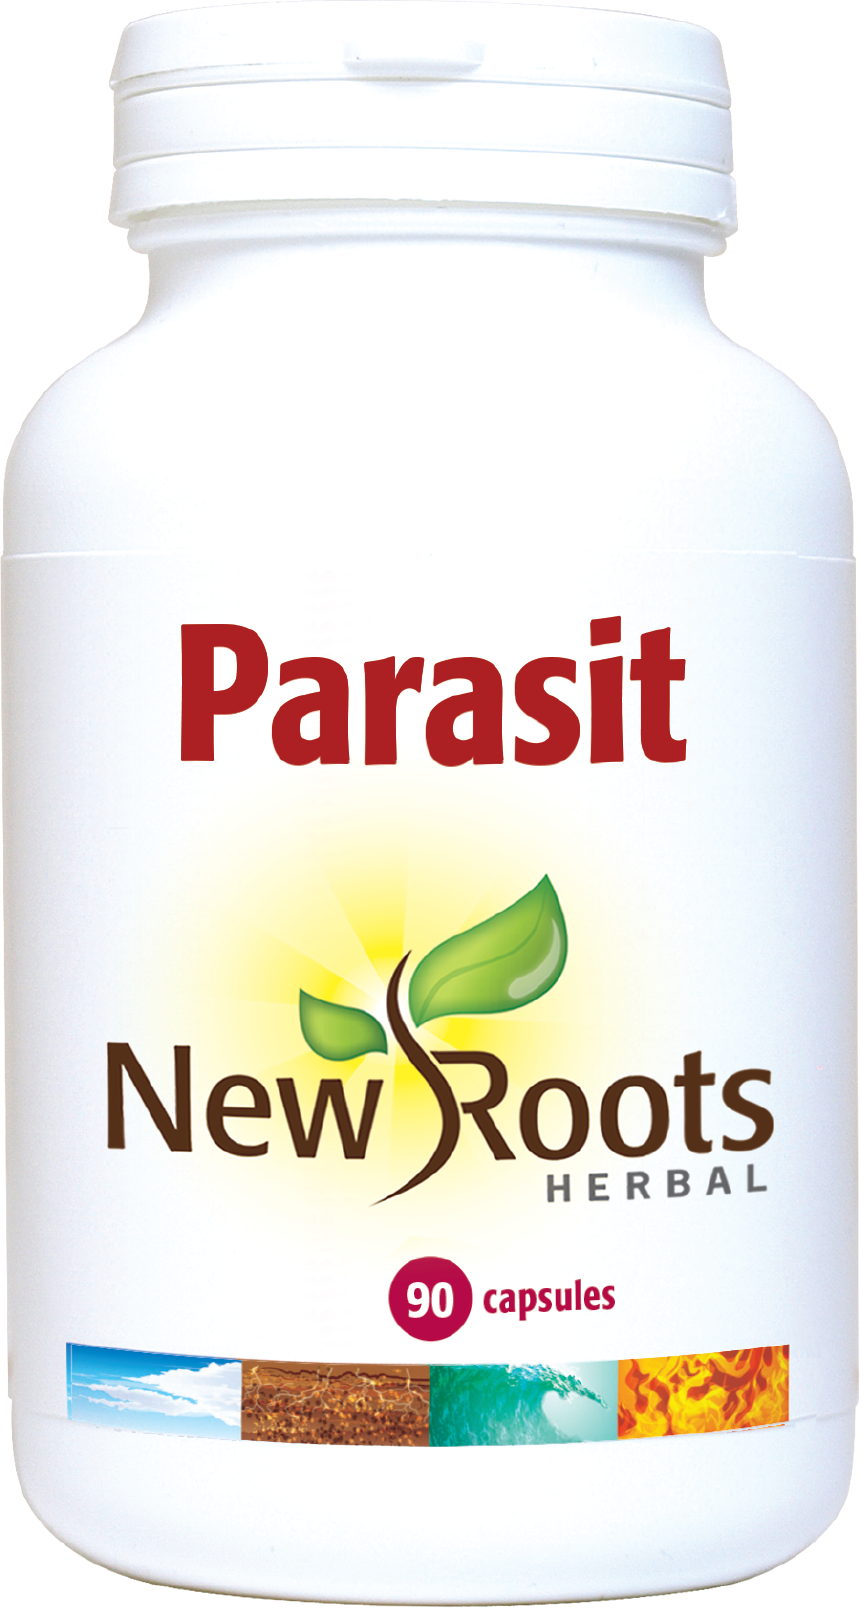 Parasit - 90 Capsules | New Roots Herbal